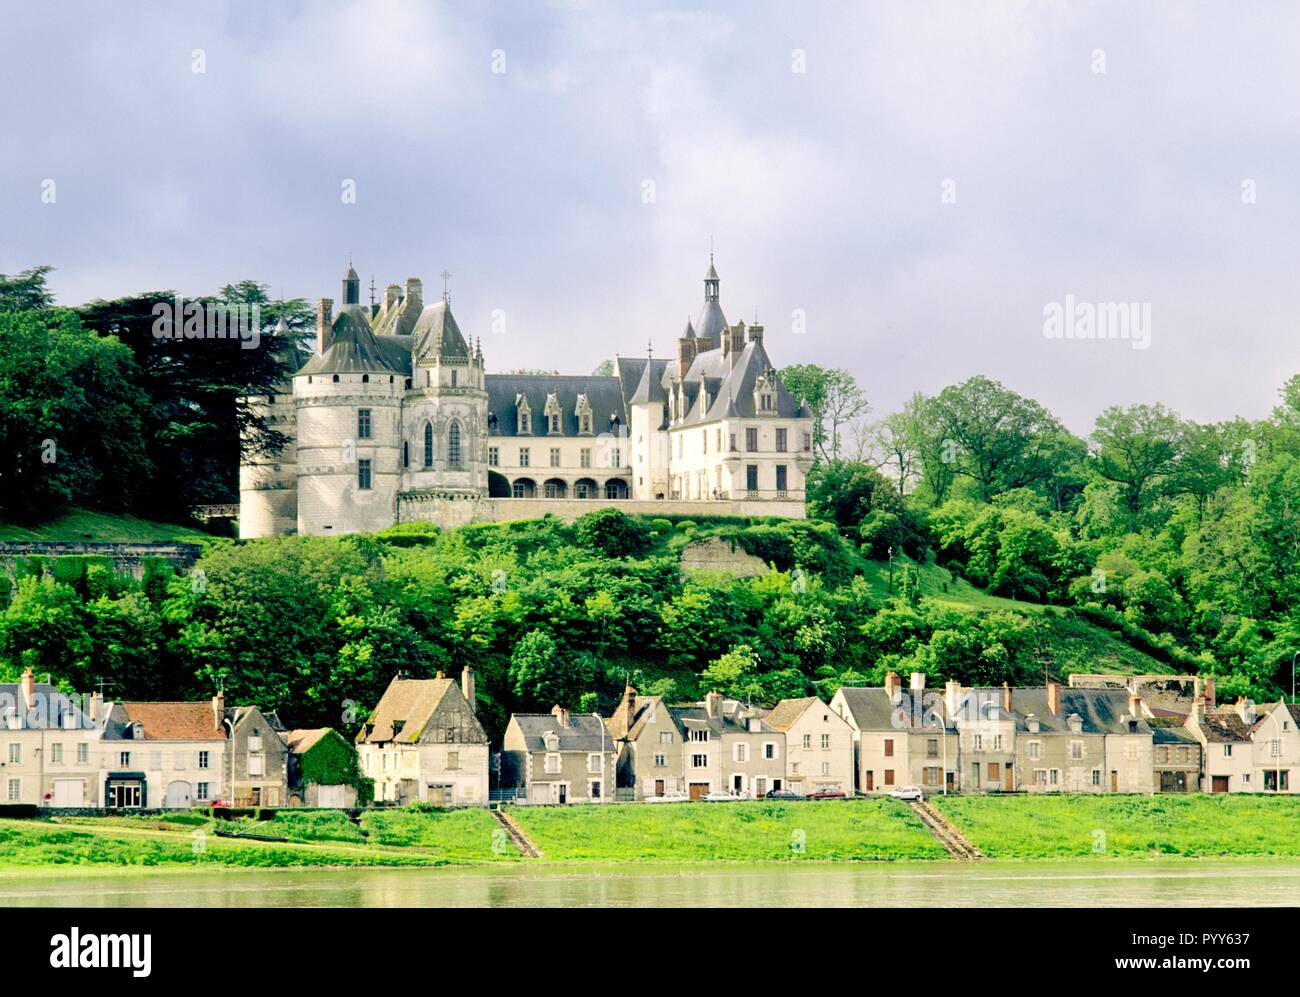 The village and Chateau of Chaumont sur Loire on the River Loire in Loir et Cher region of France Stock Photo